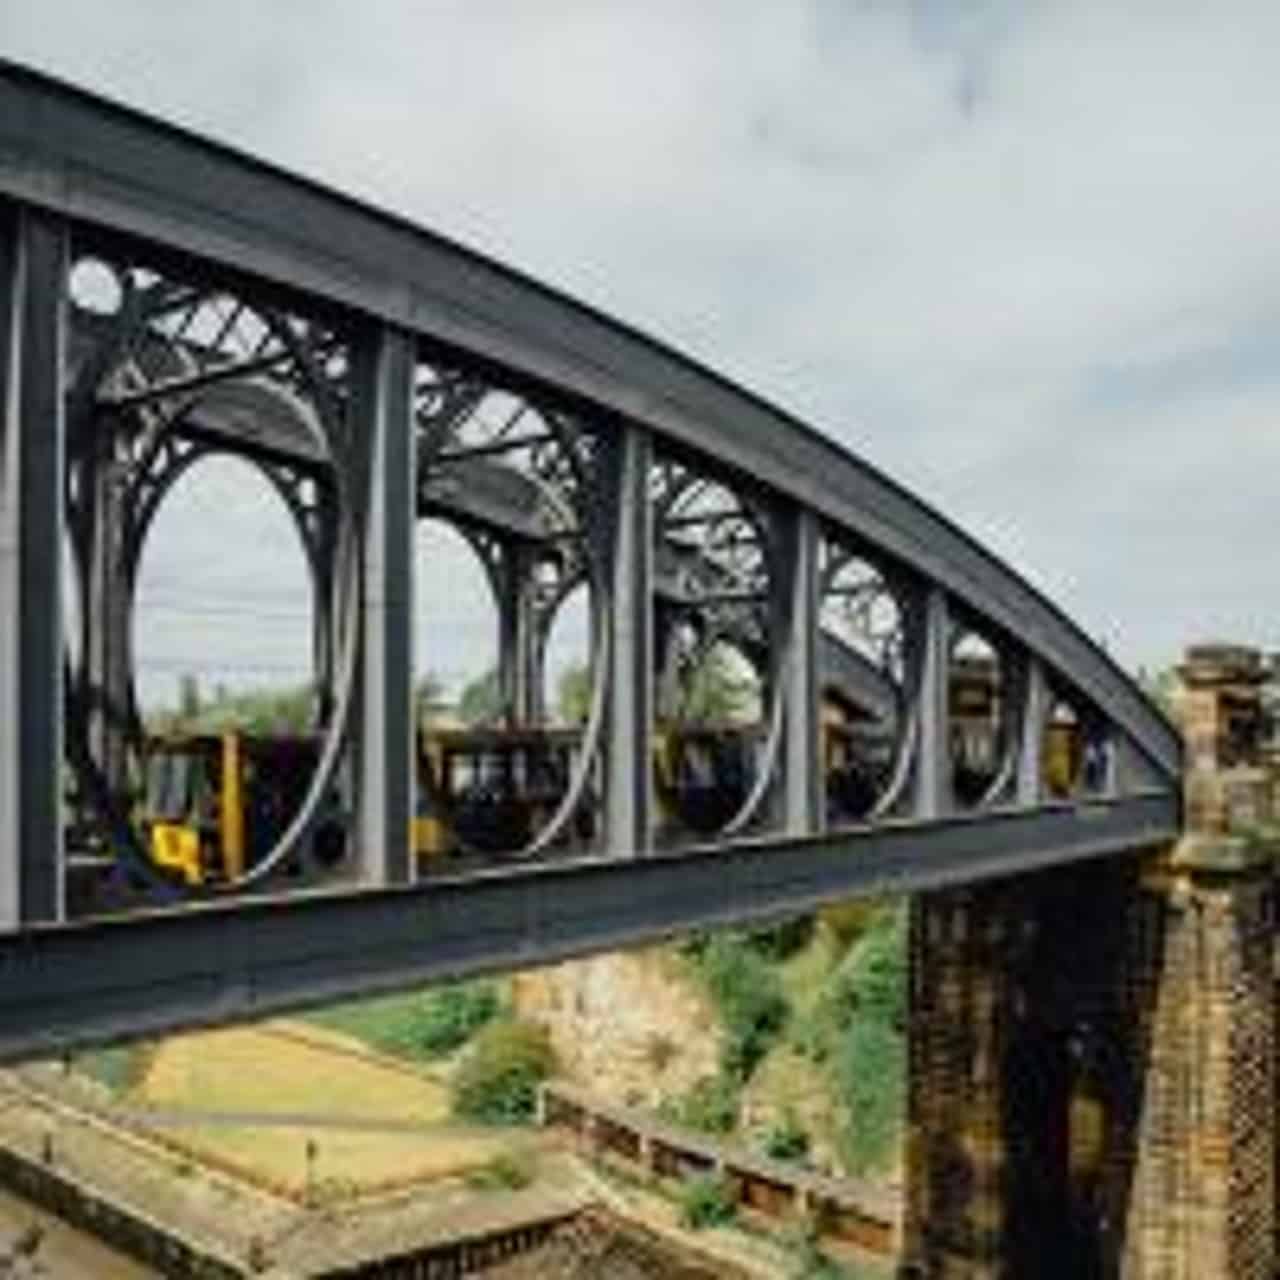 Tyne and Wear begin running trains again after repairs to Sunderland line